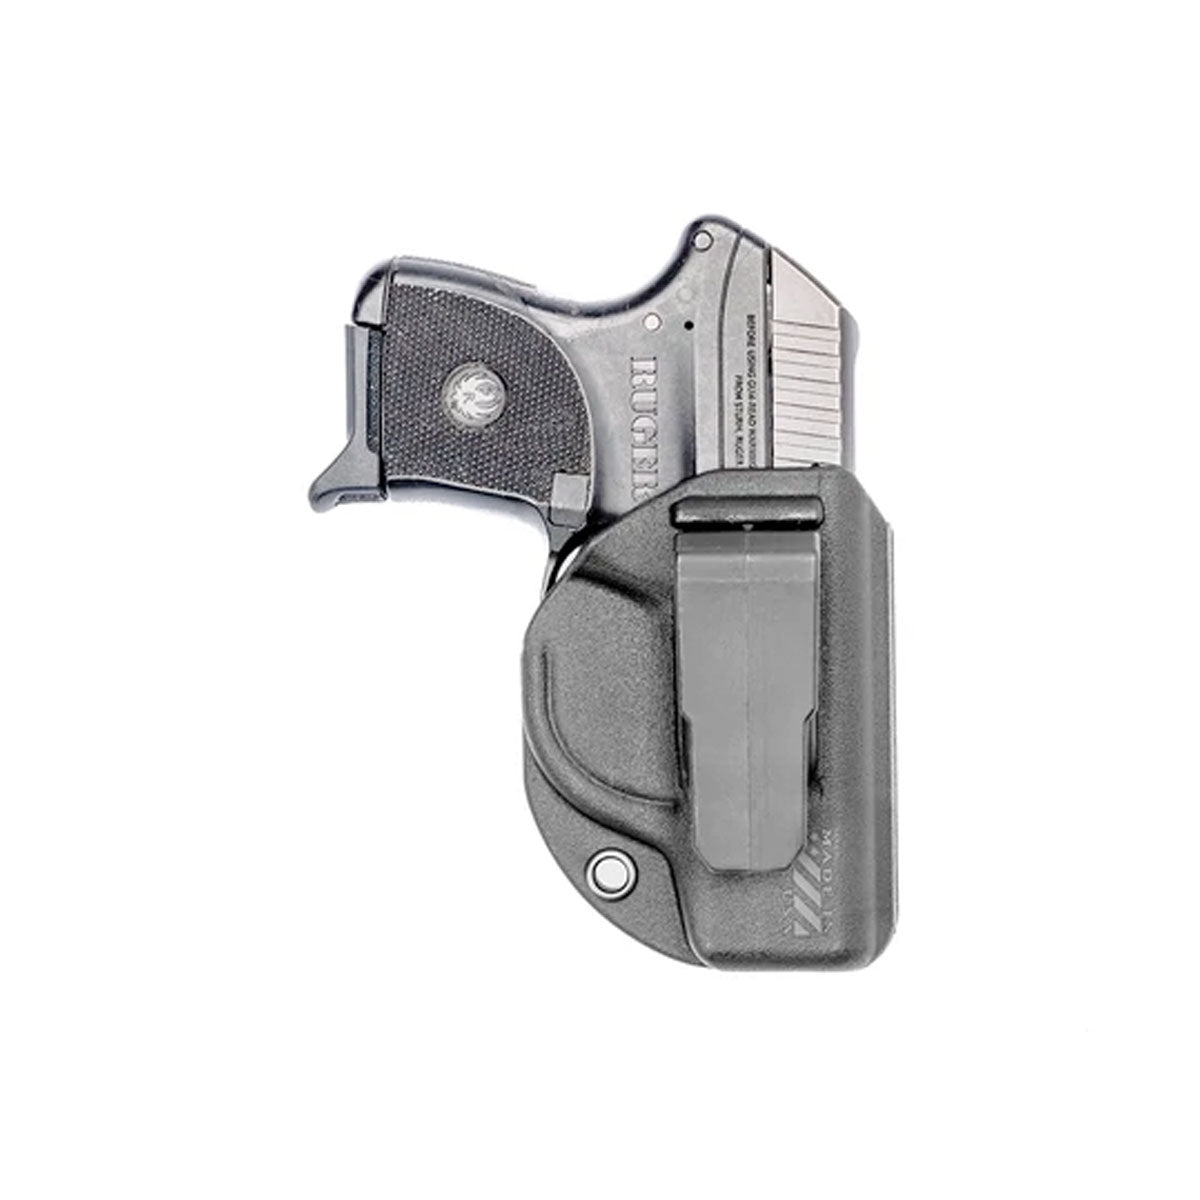 Blade-Tech Klipt IWB Holster Black Right Hand Only Holsters Blade-Tech Holsters Ruger LCP Tactical Gear Supplier Tactical Distributors Australia